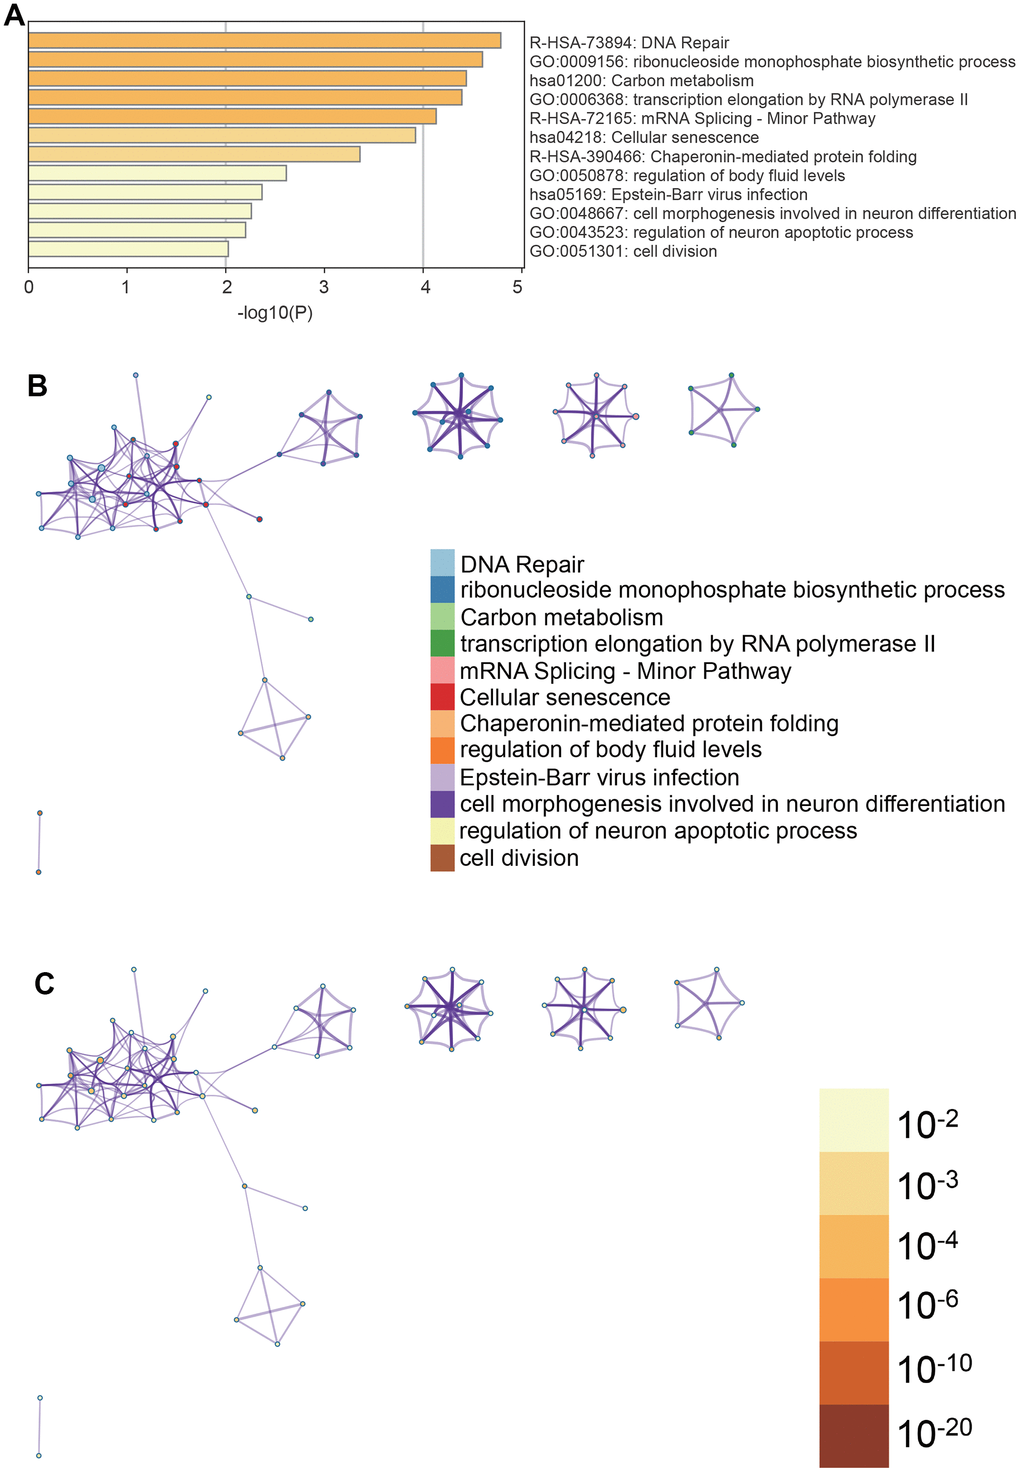 Metascape enrichment analysis. (A) Cell senescence, cell division and DNA repair can be seen in the GO enrichment project (B) enrichment networks colored by enrichment terms (C) enrichment networks colored by p values.